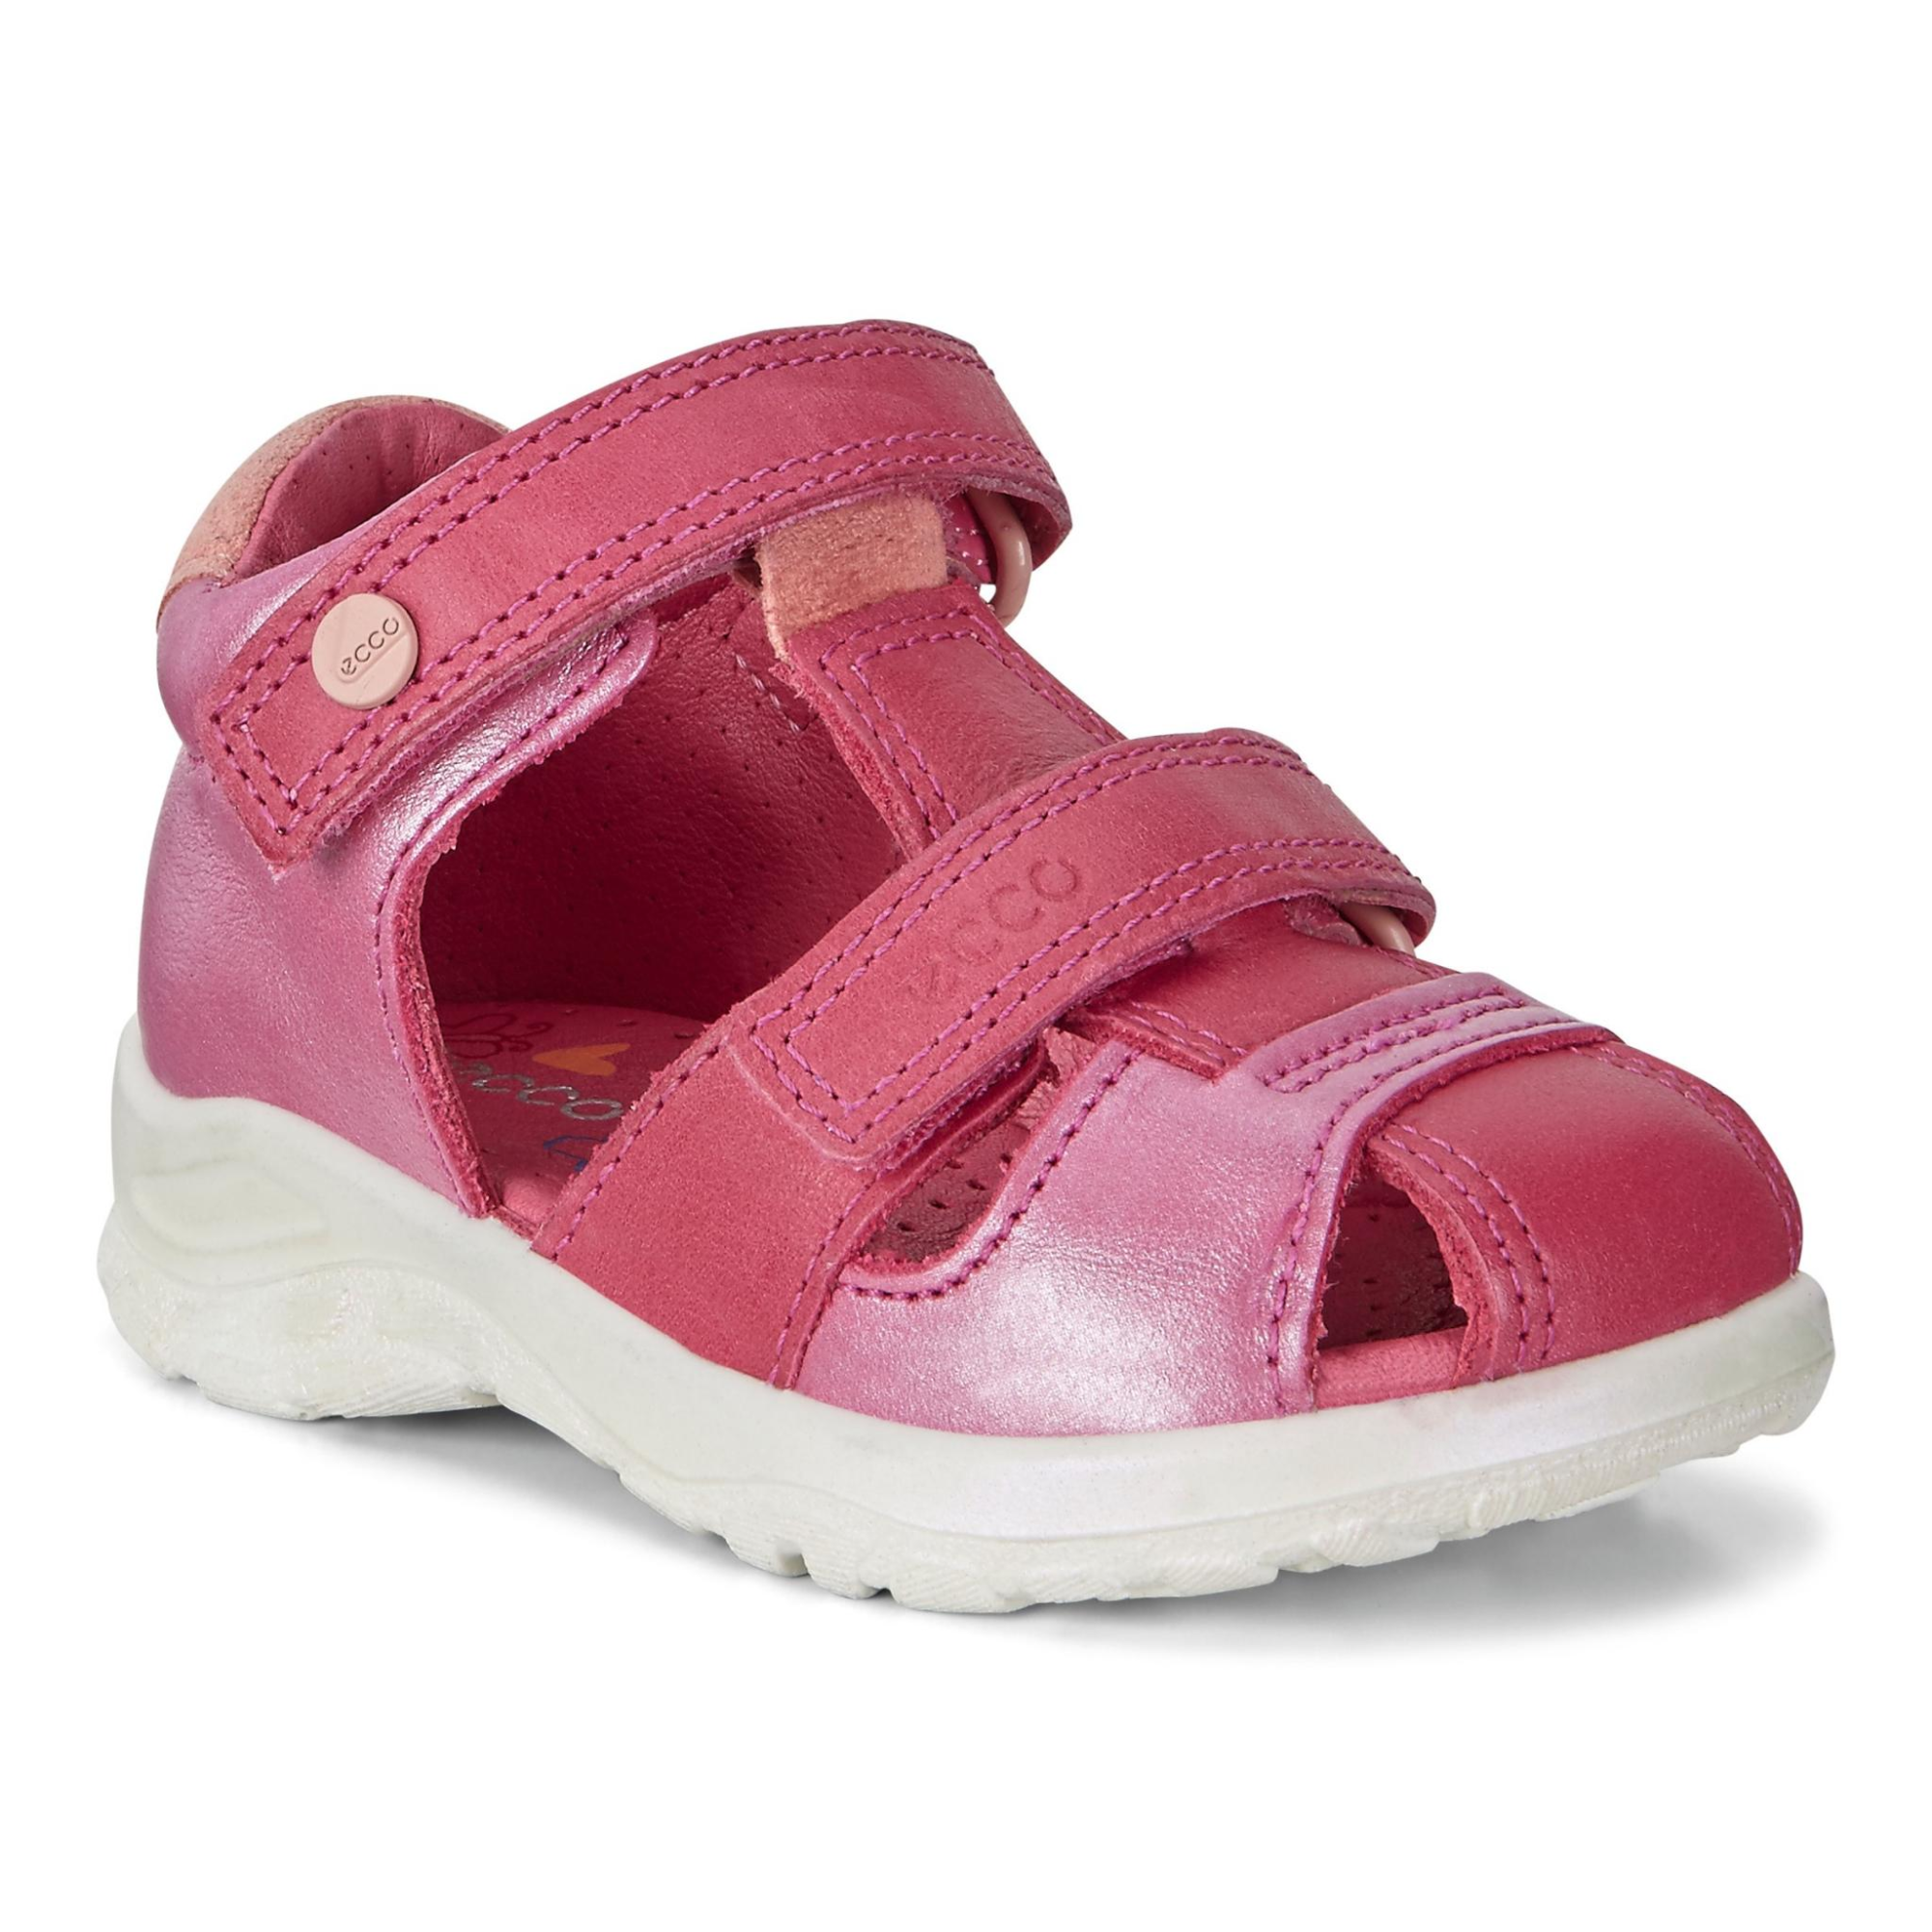 Ecco Peekaboo Sandal 24 Products - Veryk Mall - Veryk Mall, many product, quick response, safe your money!